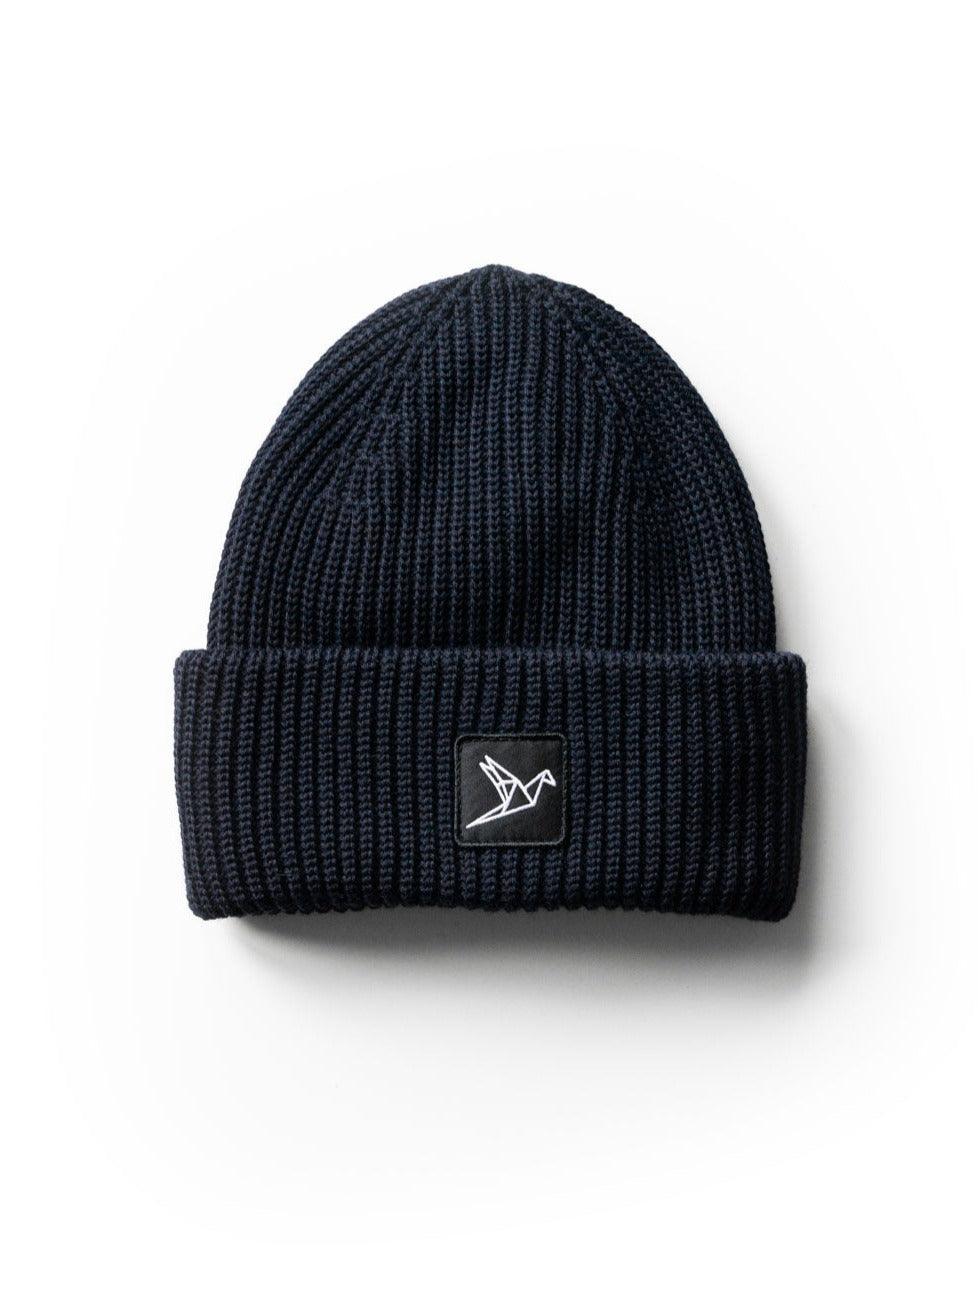 Beanie Navy - ORILABO Project